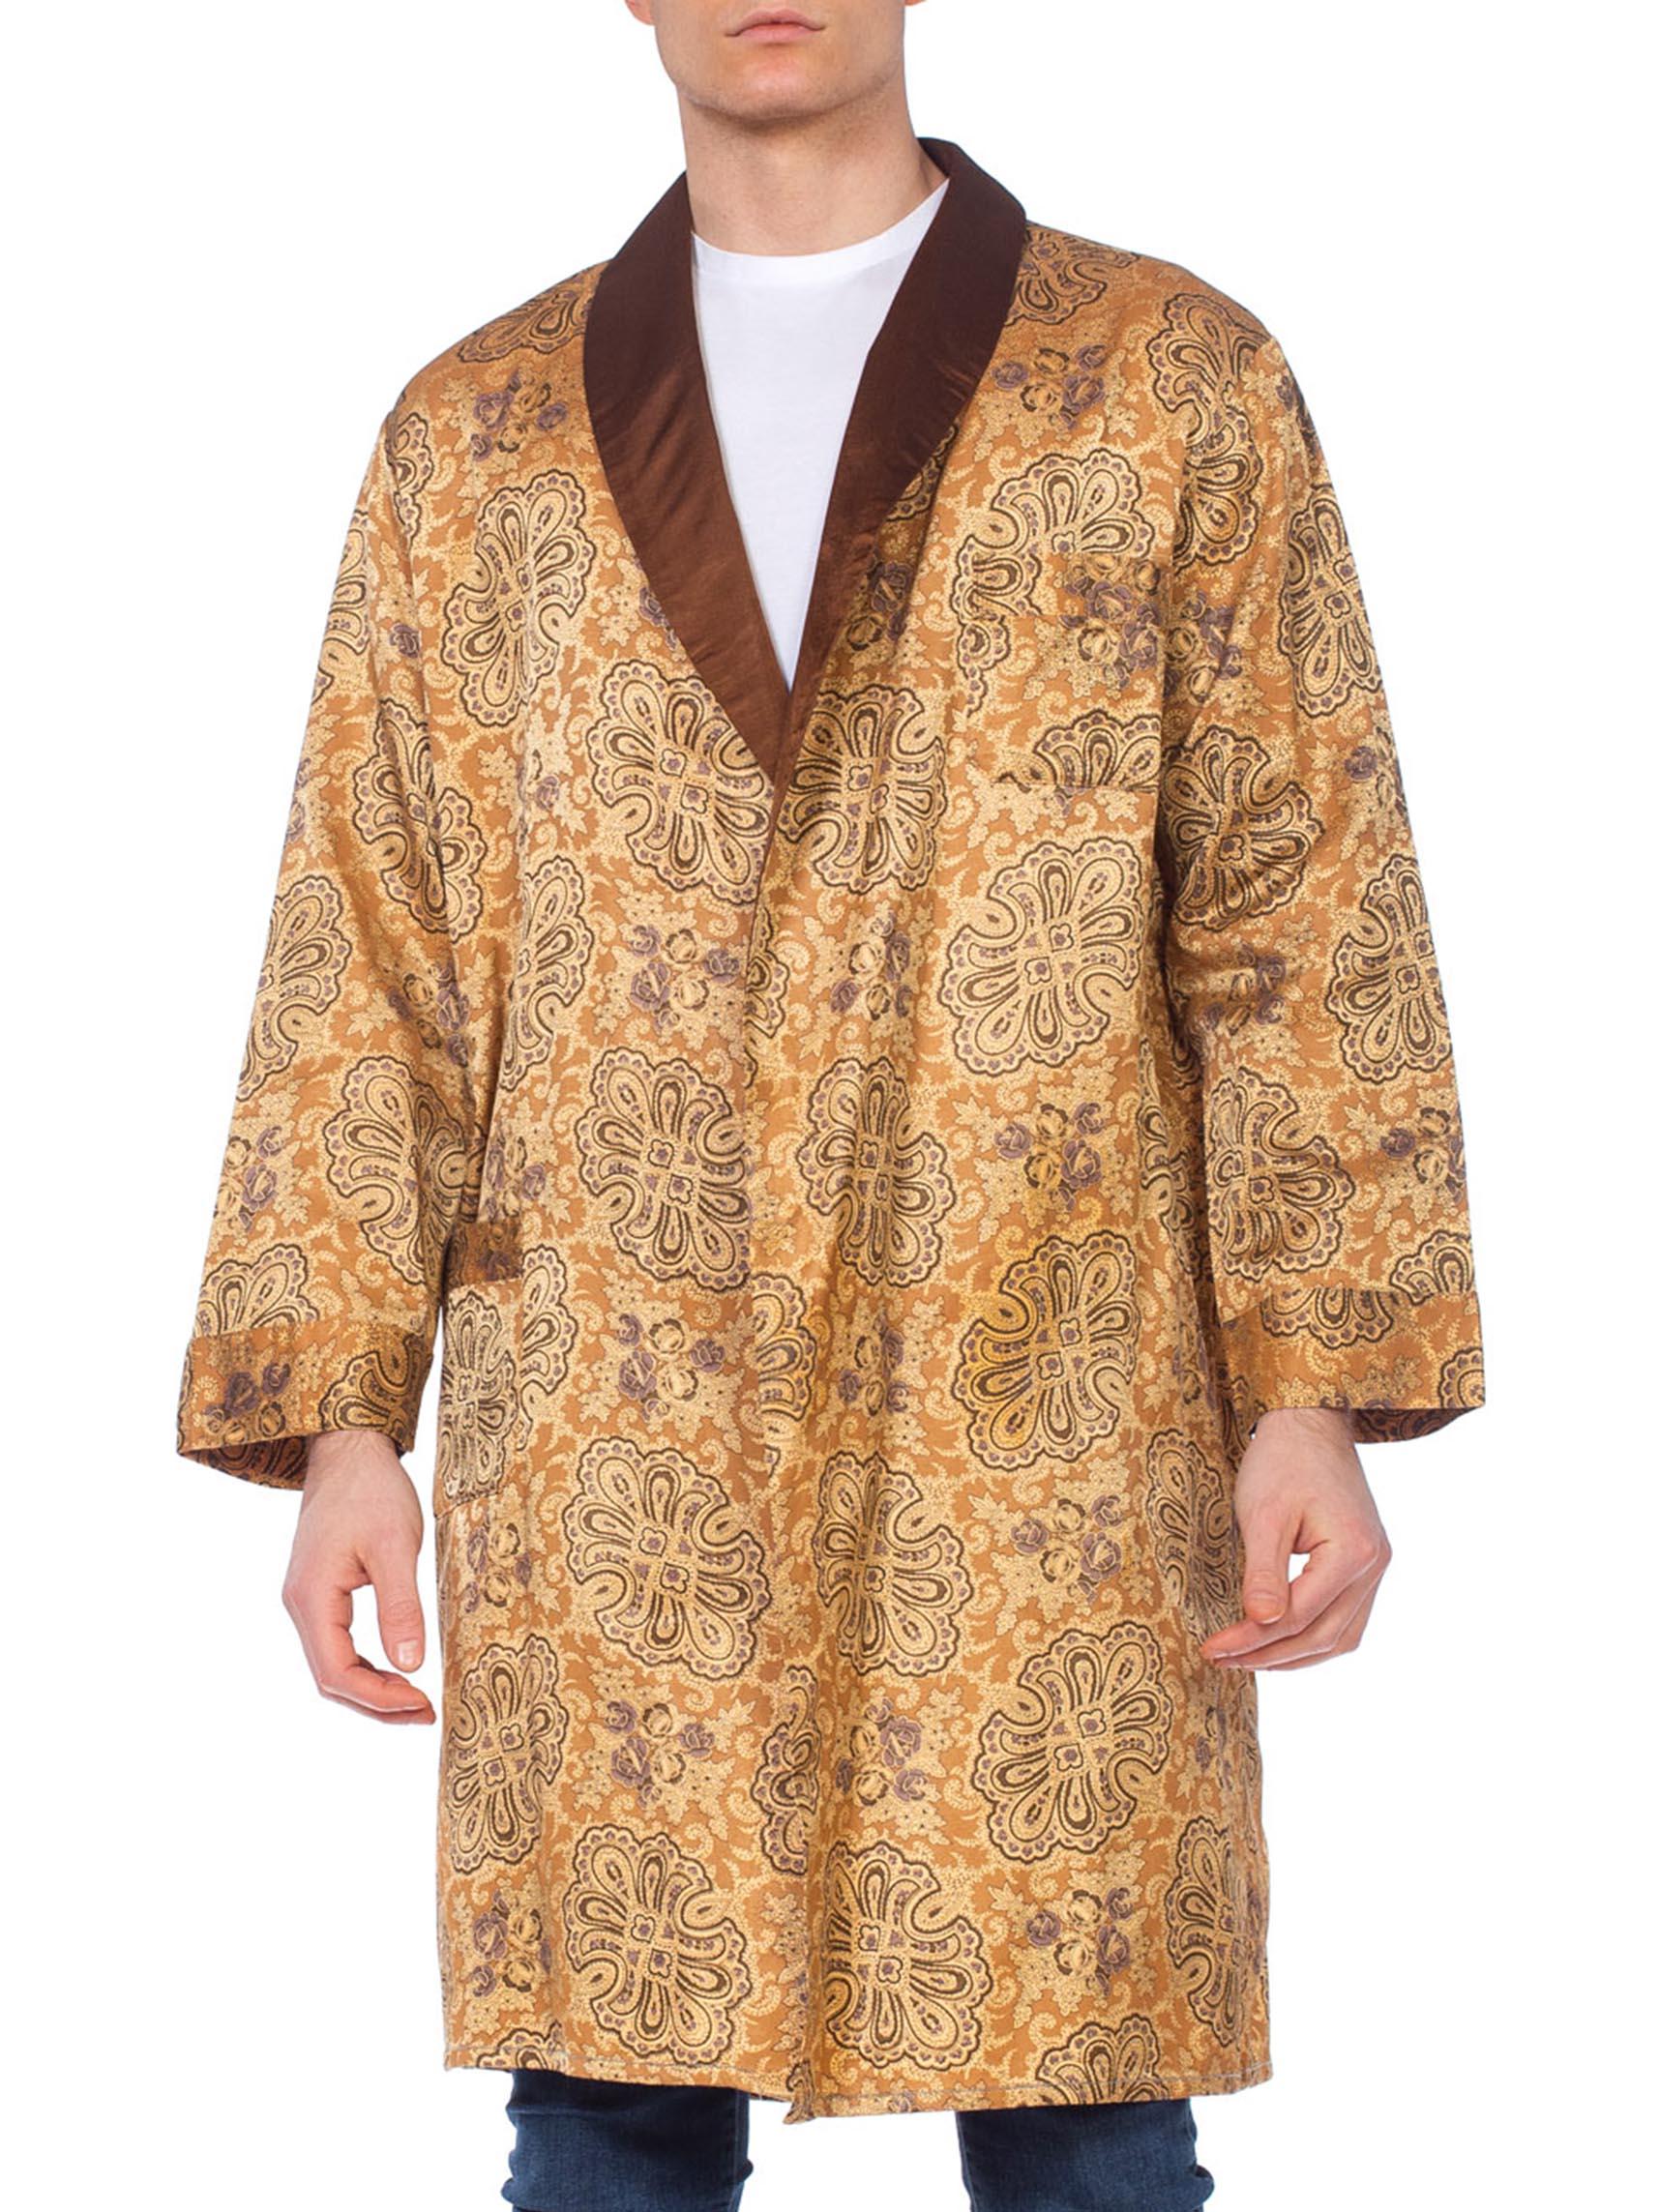 Mens 1960's Satin Flanel Gold Paisley Robe 
There is a matching belt that is not shot with the Robe